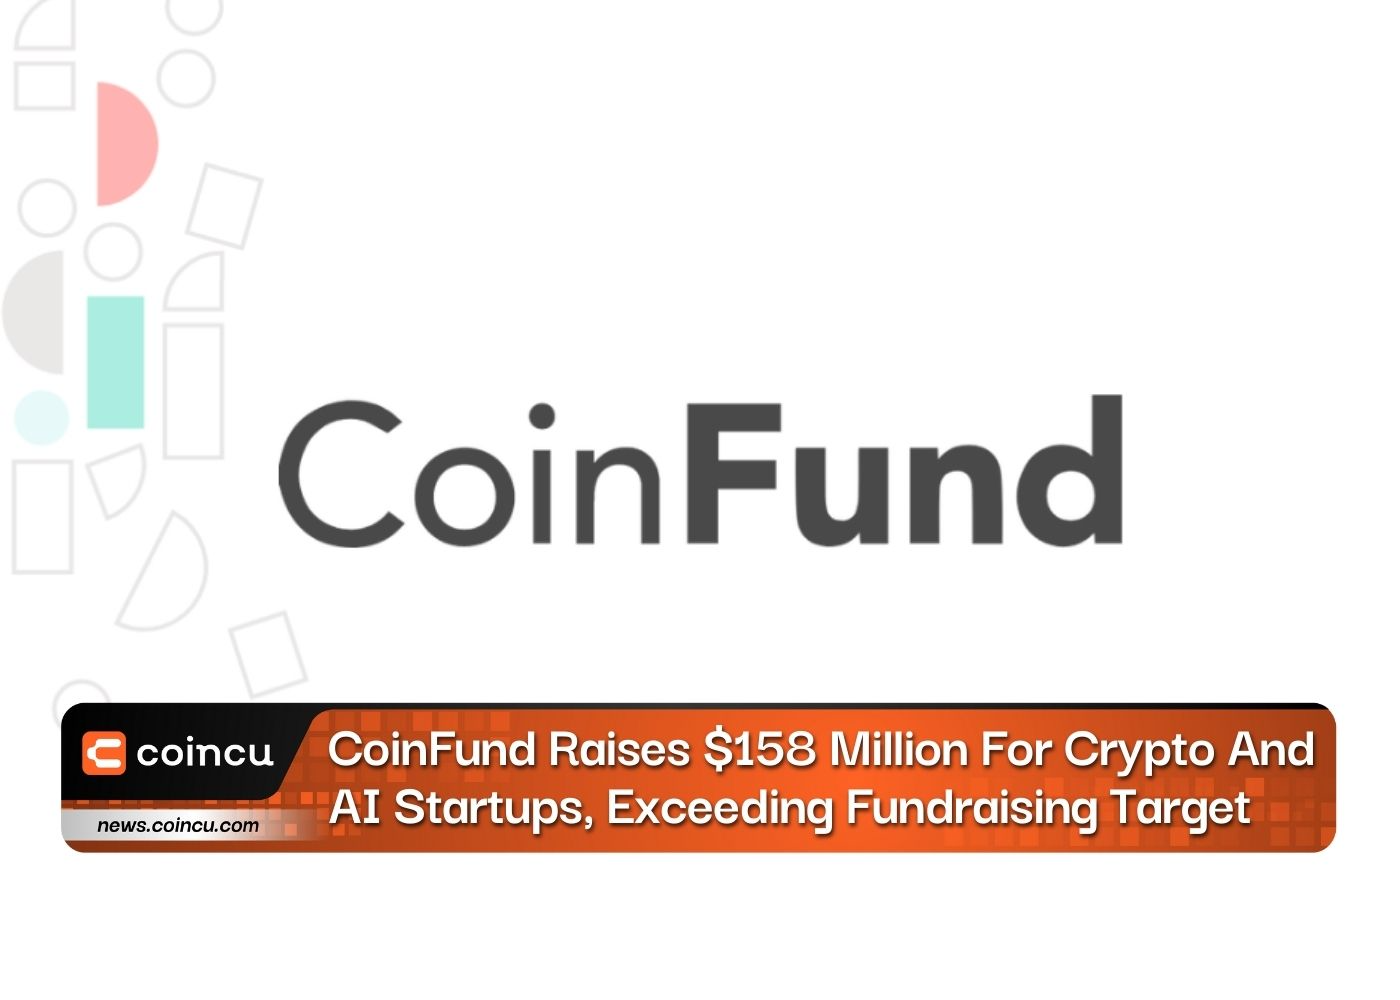 CoinFund Raises $158 Million For Crypto And AI Startups, Exceeding Fundraising Target